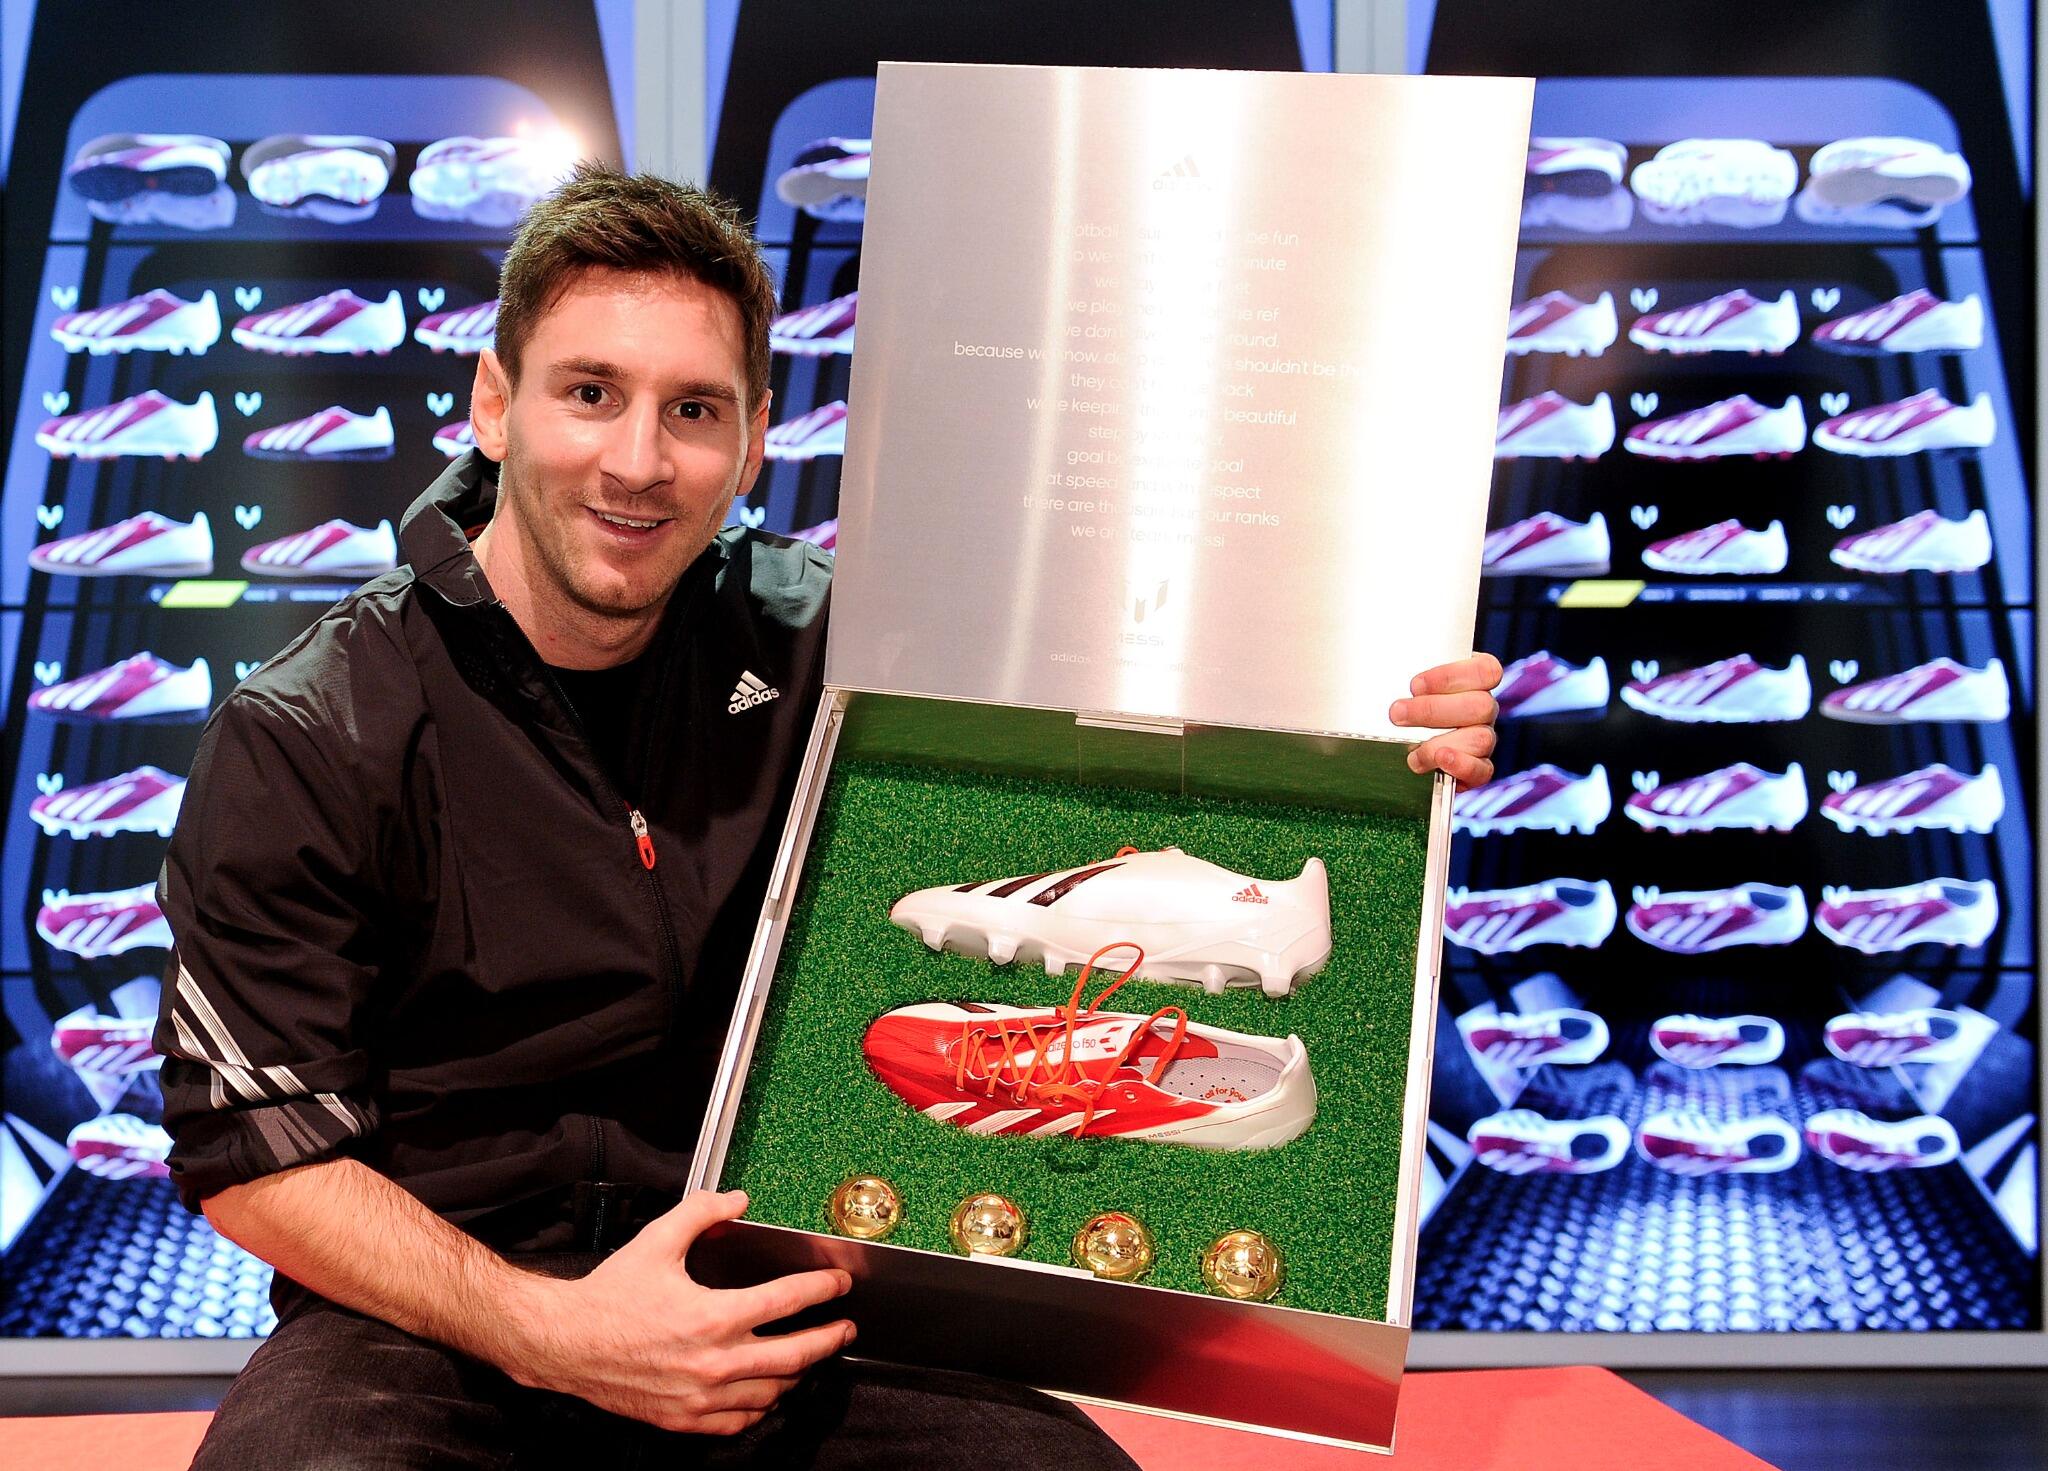 adidas Football on Twitter: "Follow and this to win a limited edition Messi Presentation Box! http://t.co/h5GNkzfVl5" /